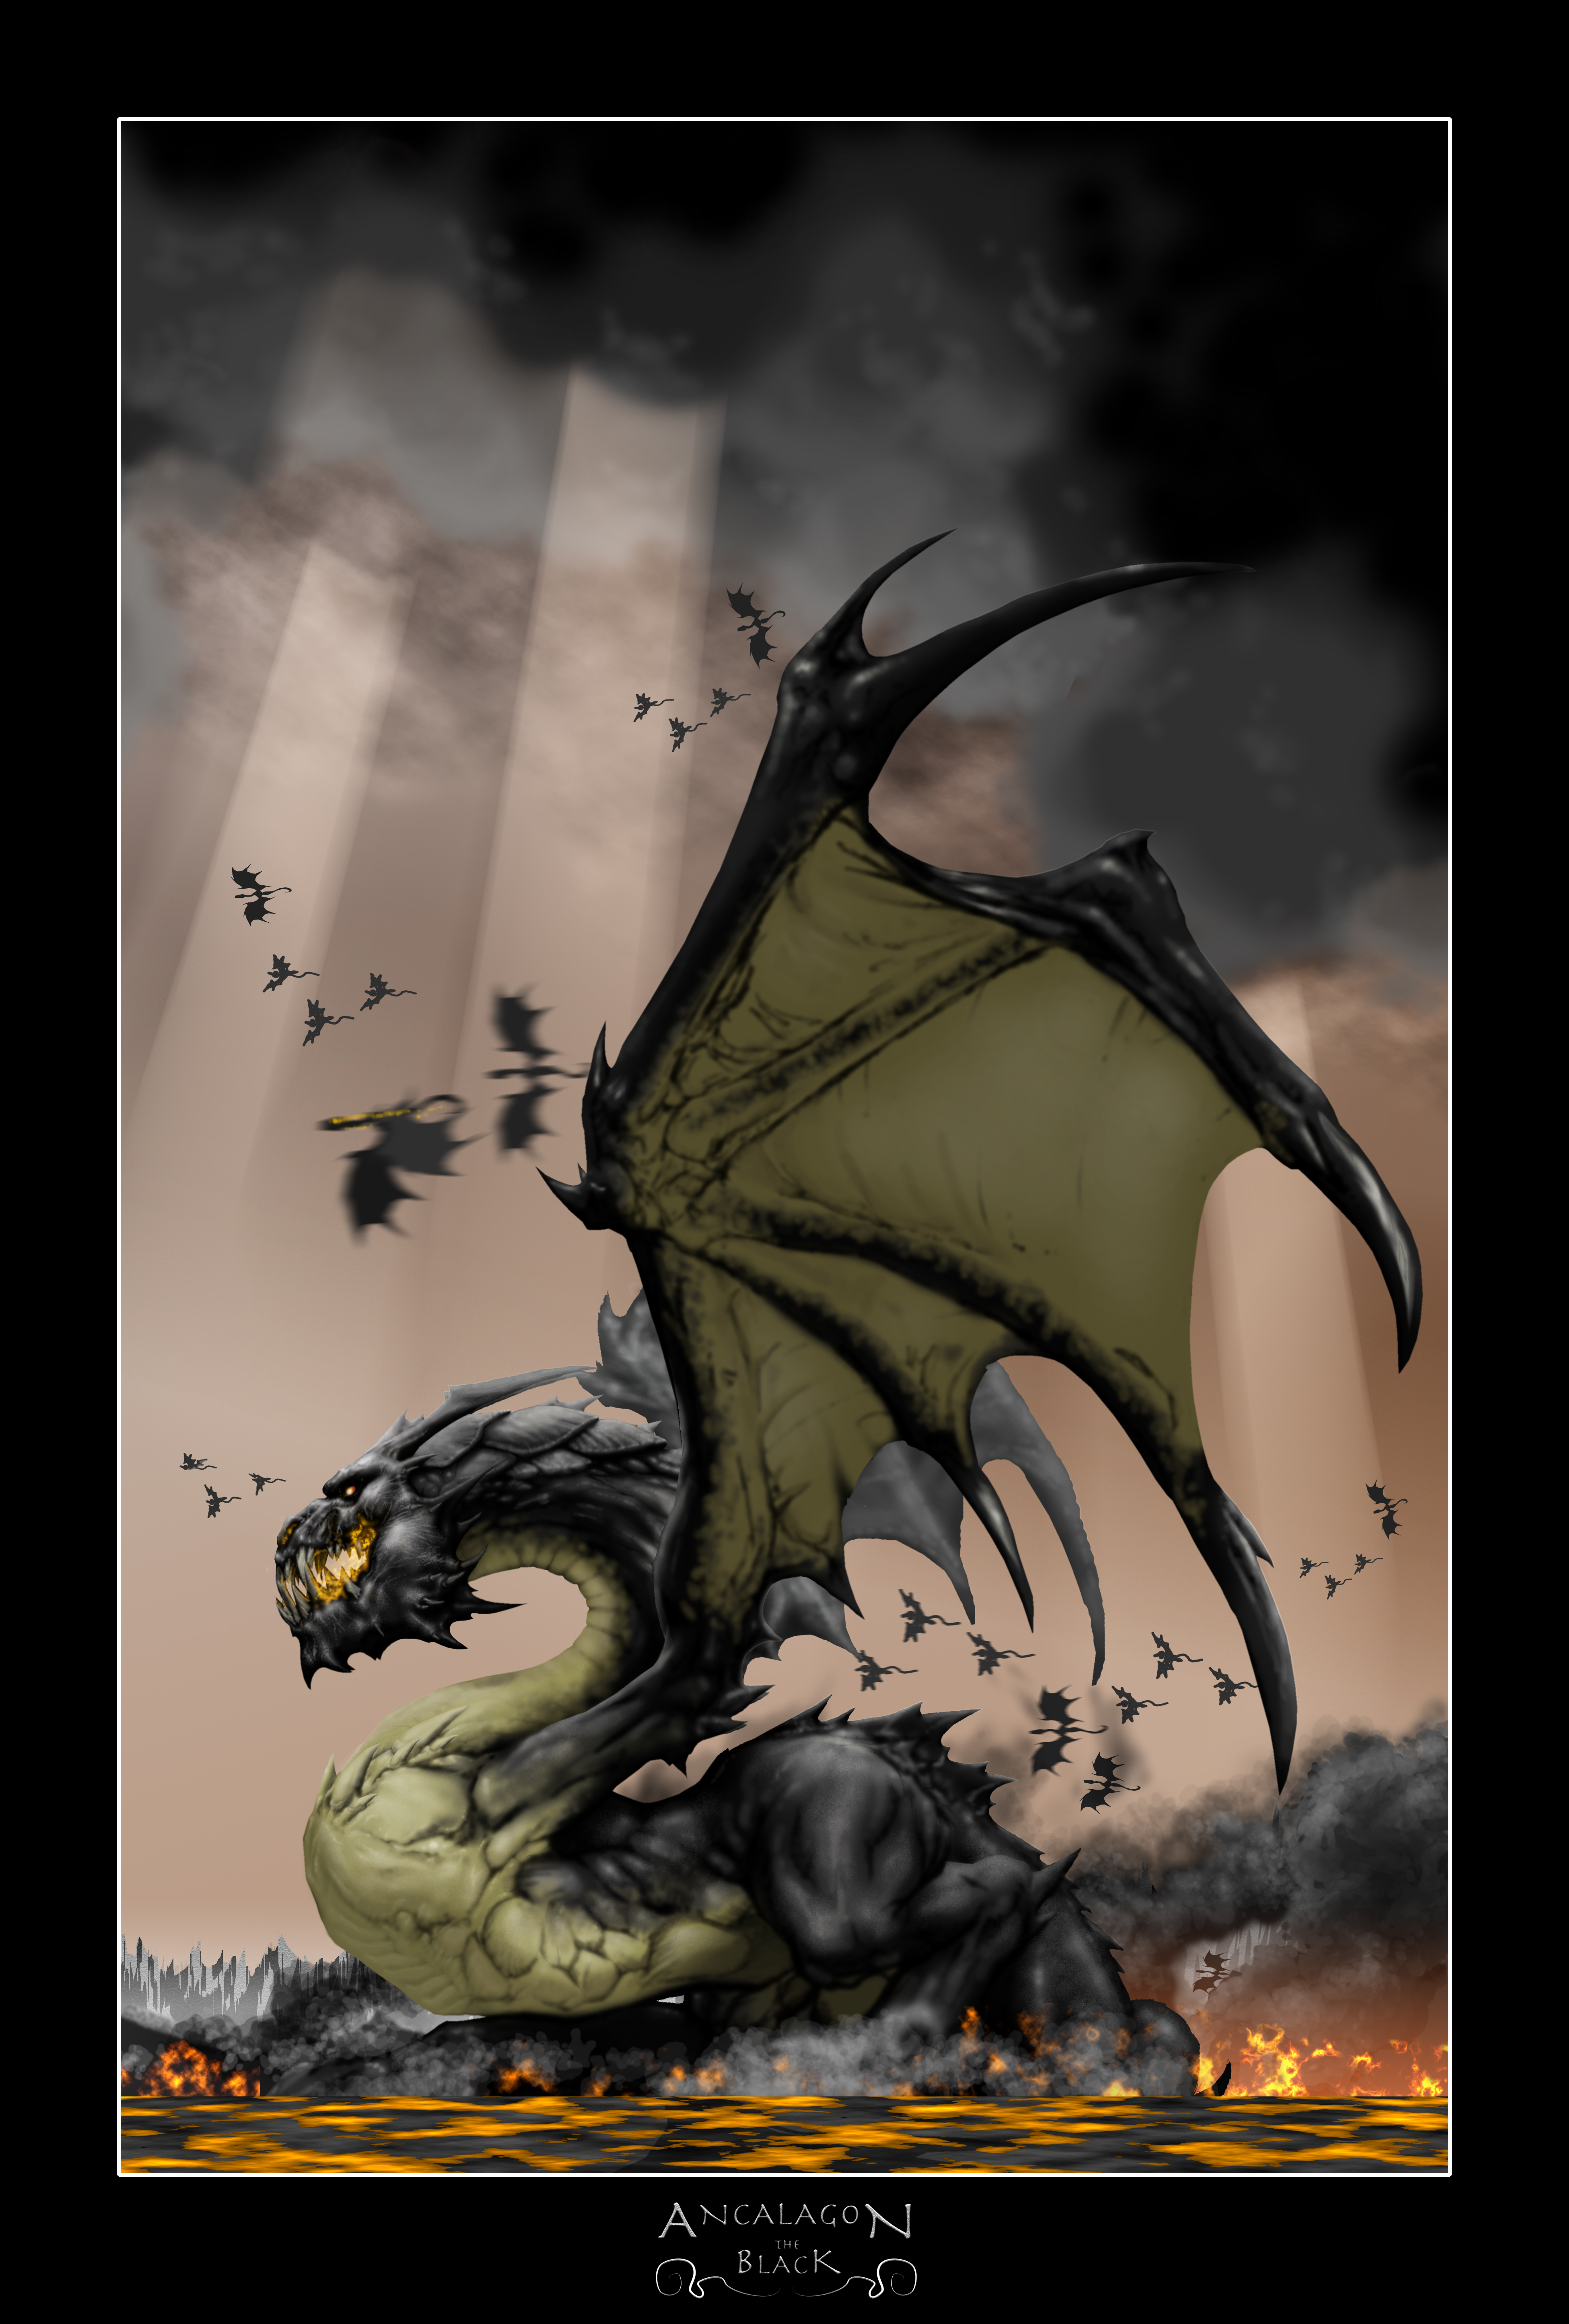 Could Ancalagon the Black (LOTR) defeat and kill Aegon the